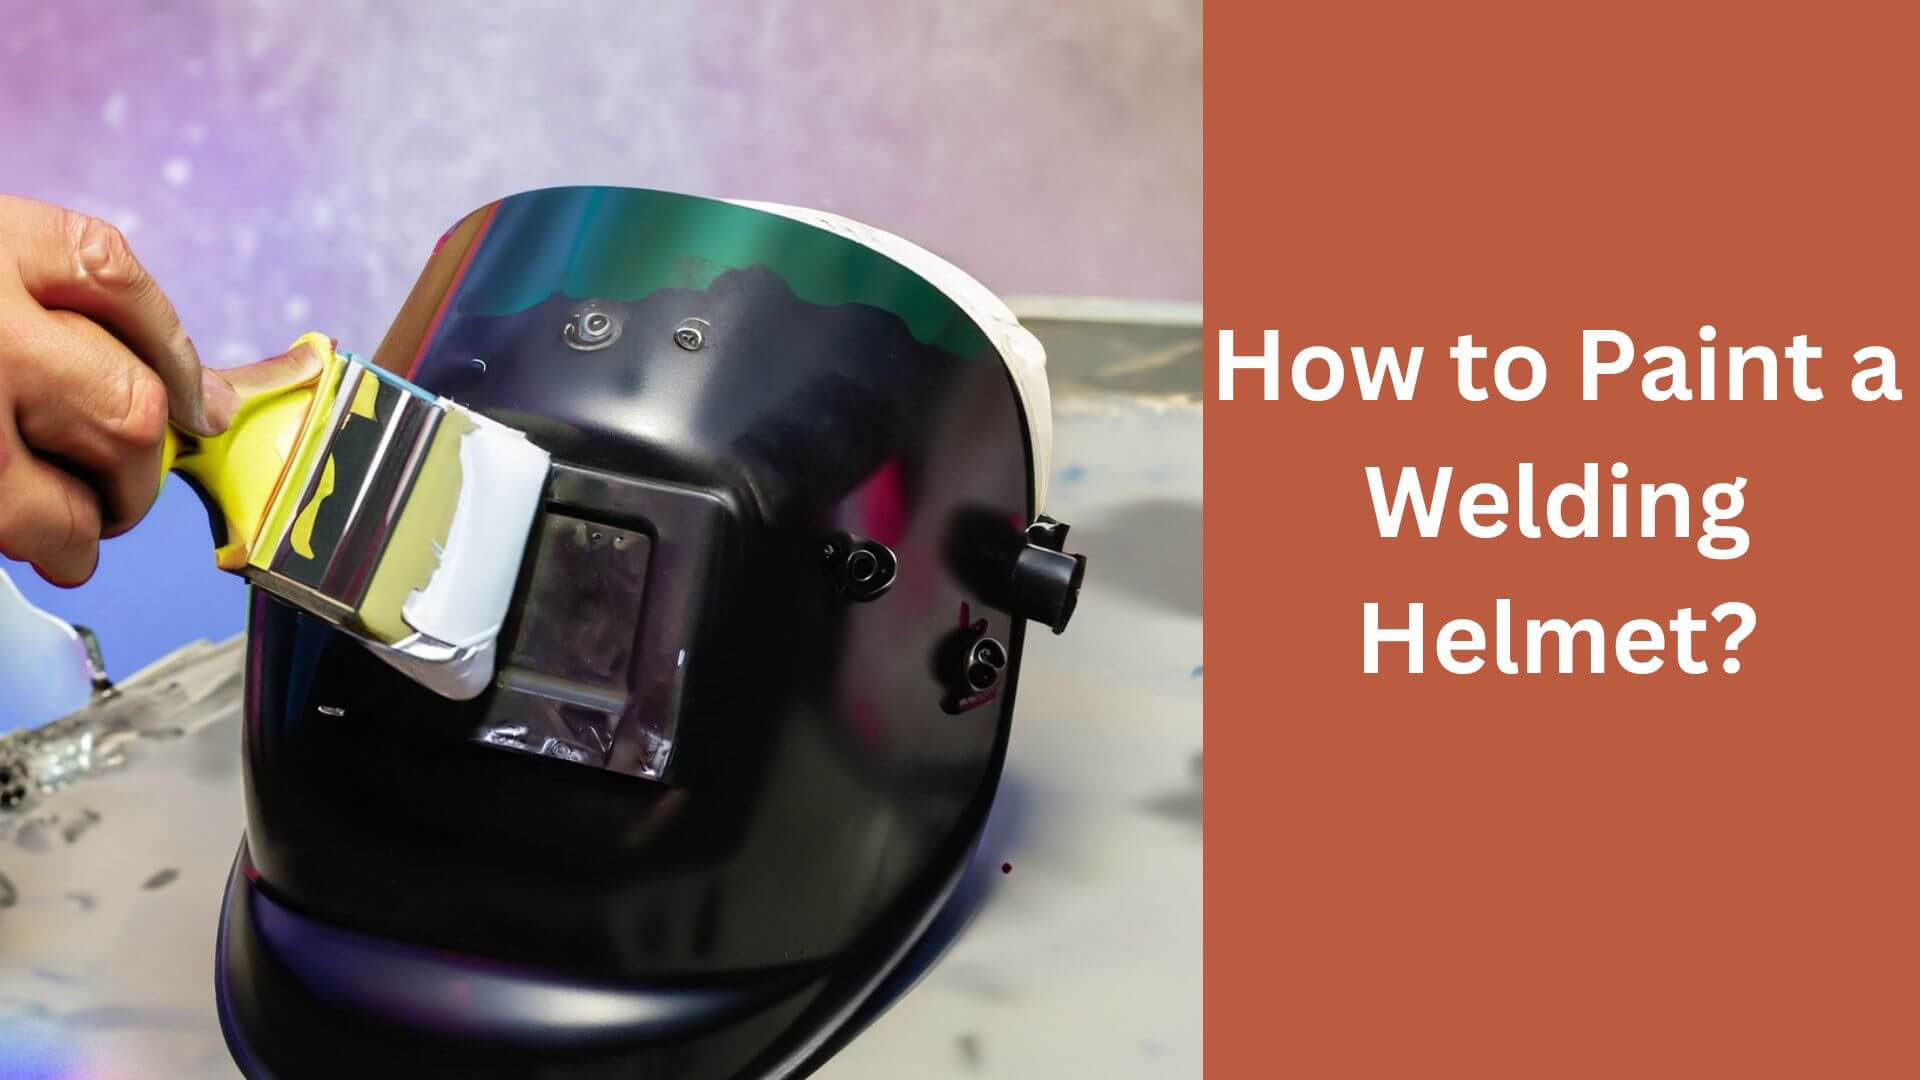 How to Paint a Welding Helmet? Step by Step.